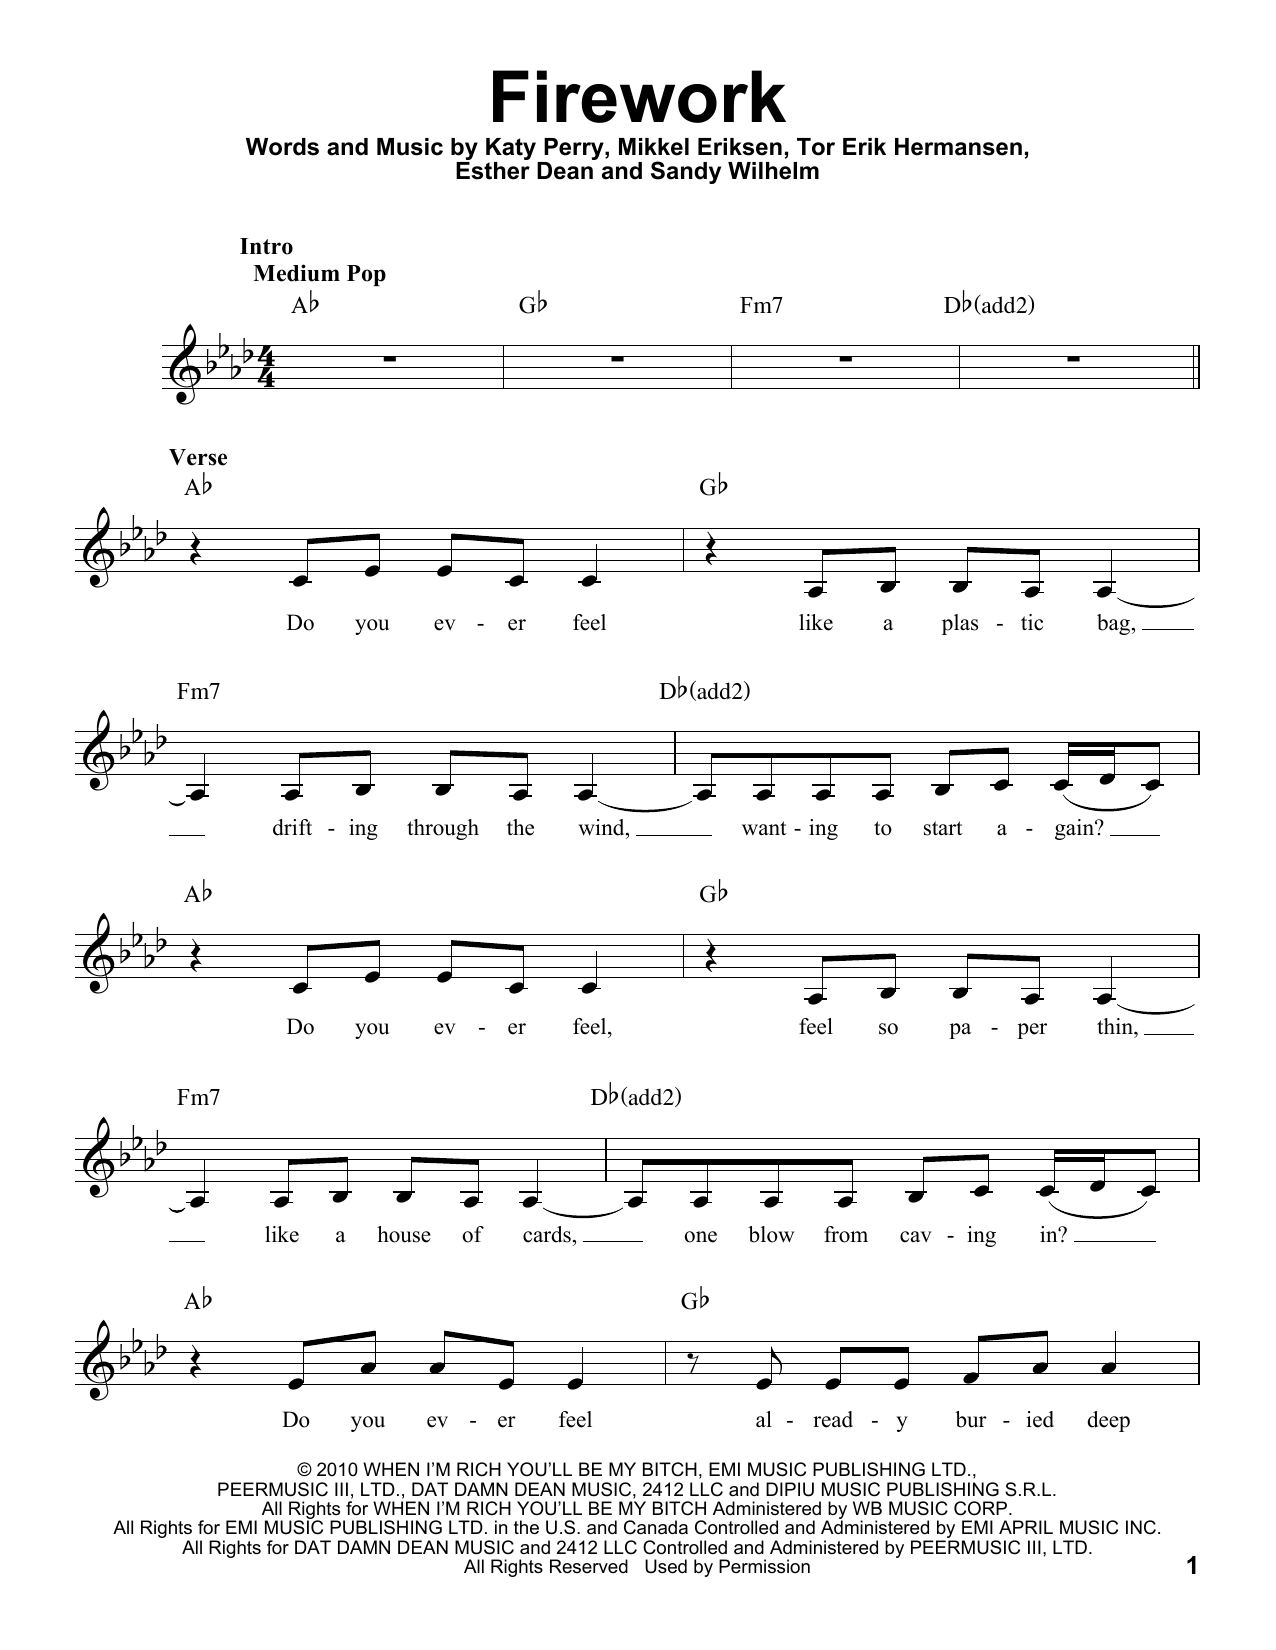 Download Katy Perry Firework Sheet Music